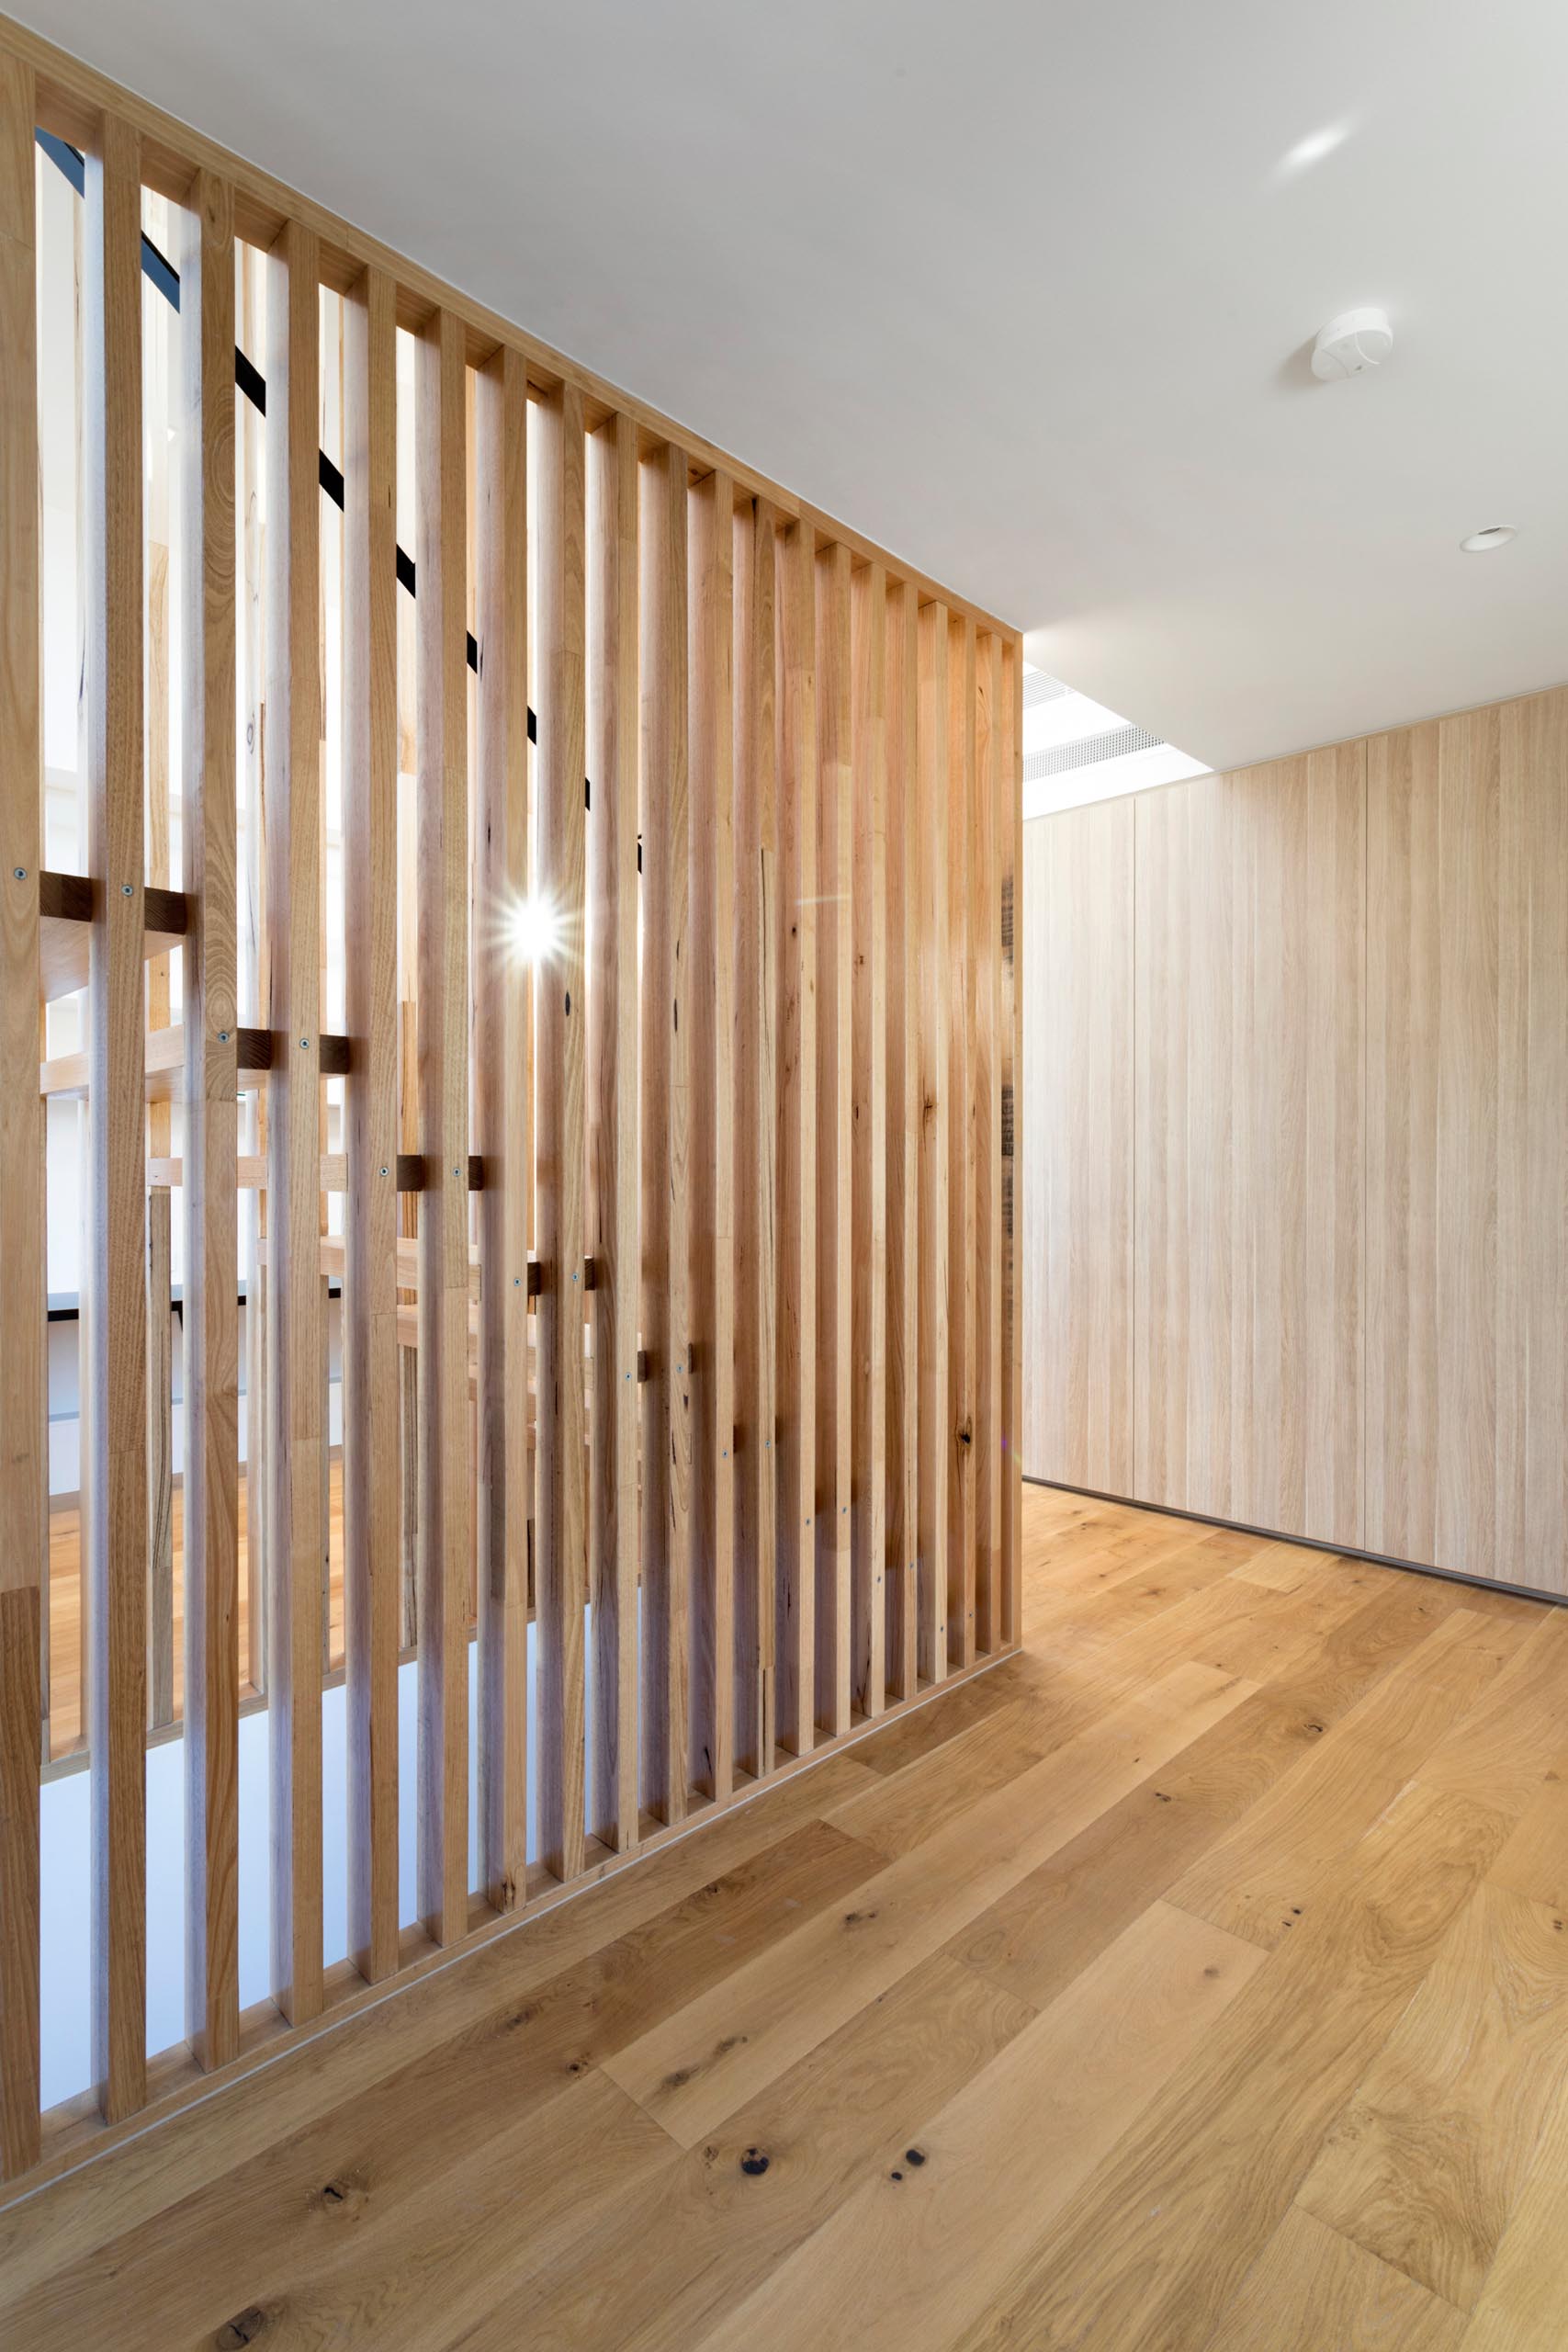 This staircase has solid timber stair tread that sit perfectly in between long vertical timber battens without the need for stair stringers.